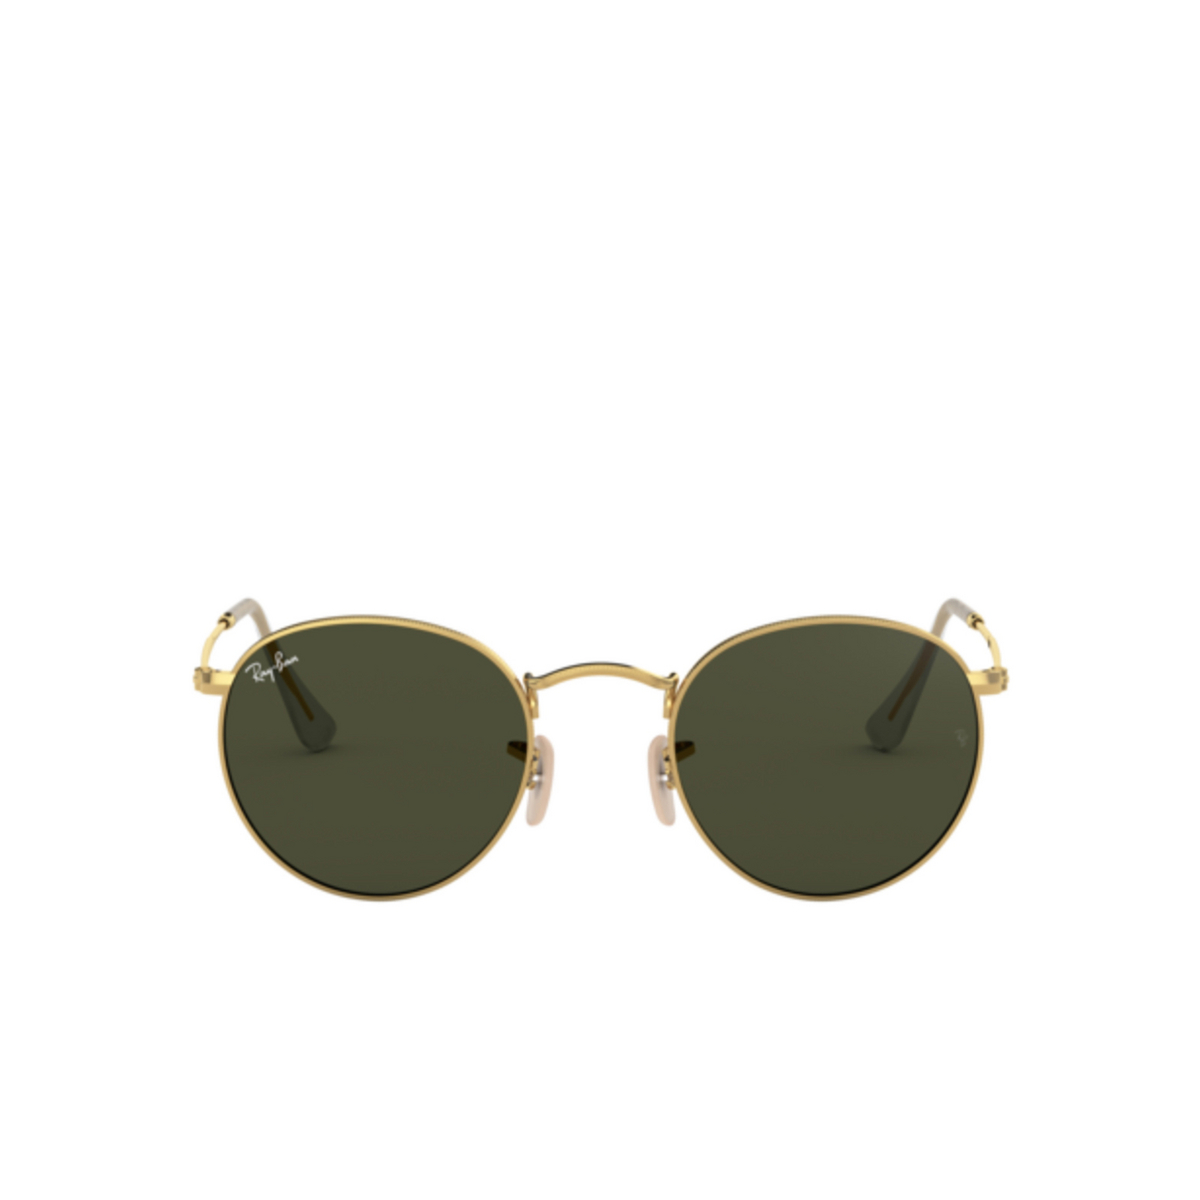 Ray-Ban ROUND METAL Sunglasses 001 Arista - front view